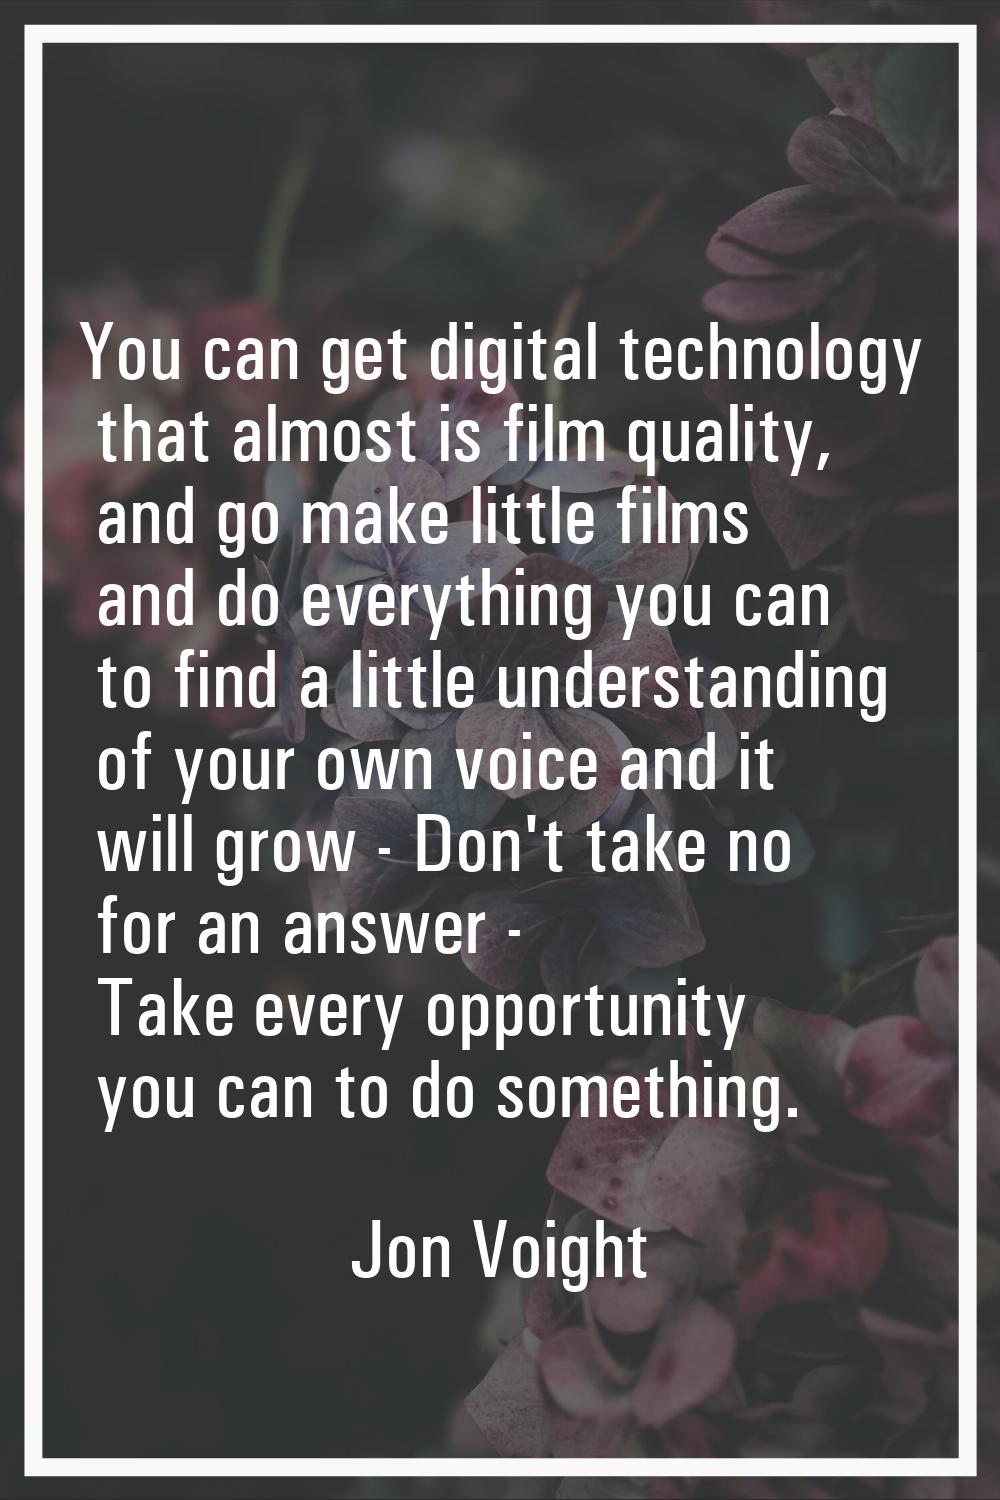 You can get digital technology that almost is film quality, and go make little films and do everyth